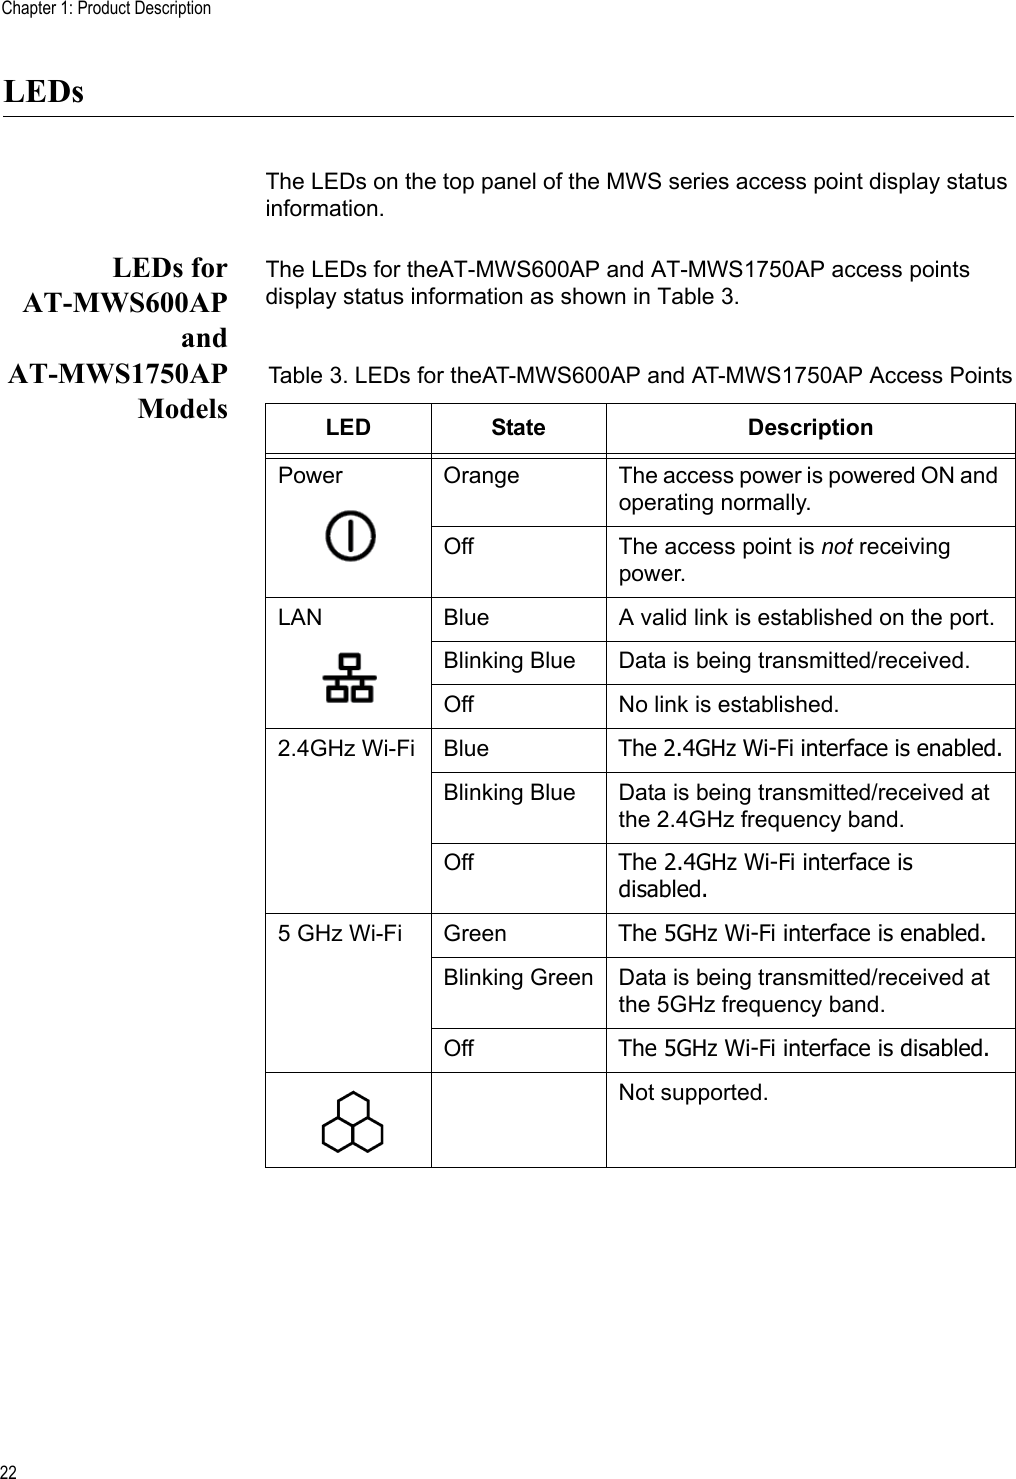 Chapter 1: Product Description22LEDsThe LEDs on the top panel of the MWS series access point display status information.LEDs forAT-MWS600APandAT-MWS1750APModelsThe LEDs for theAT-MWS600AP and AT-MWS1750AP access points display status information as shown in Table 3.Table 3. LEDs for theAT-MWS600AP and AT-MWS1750AP Access PointsLED State DescriptionPower Orange The access power is powered ON and operating normally. Off The access point is not receiving power.LAN Blue A valid link is established on the port.Blinking Blue Data is being transmitted/received.Off No link is established.2.4GHz Wi-Fi Blue The 2.4GHz Wi-Fi interface is enabled.Blinking Blue Data is being transmitted/received at the 2.4GHz frequency band.Off The 2.4GHz Wi-Fi interface is disabled.5 GHz Wi-Fi Green The 5GHz Wi-Fi interface is enabled.Blinking Green Data is being transmitted/received at the 5GHz frequency band.Off The 5GHz Wi-Fi interface is disabled.Not supported.